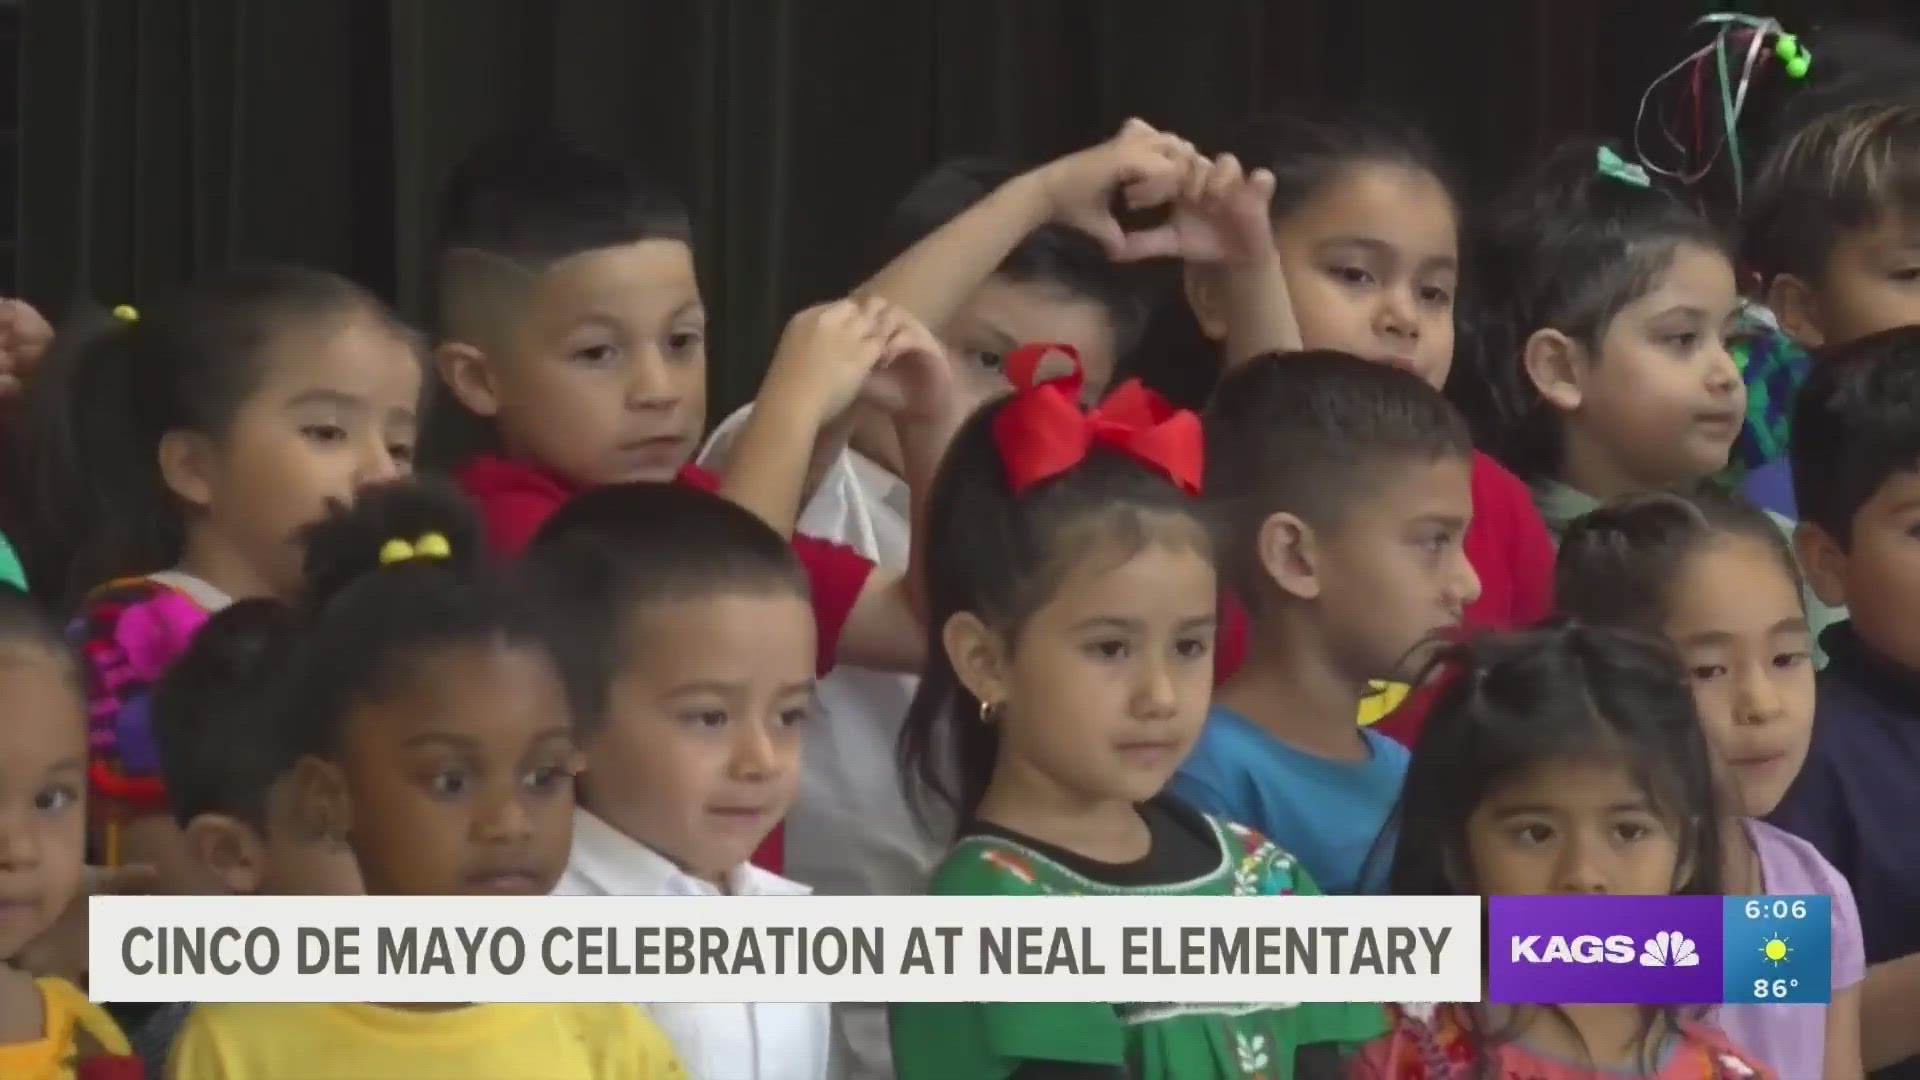 Neal Elementary held their annual Cinco De Mayo celebration with performances from students honoring traditional Mexican culture.